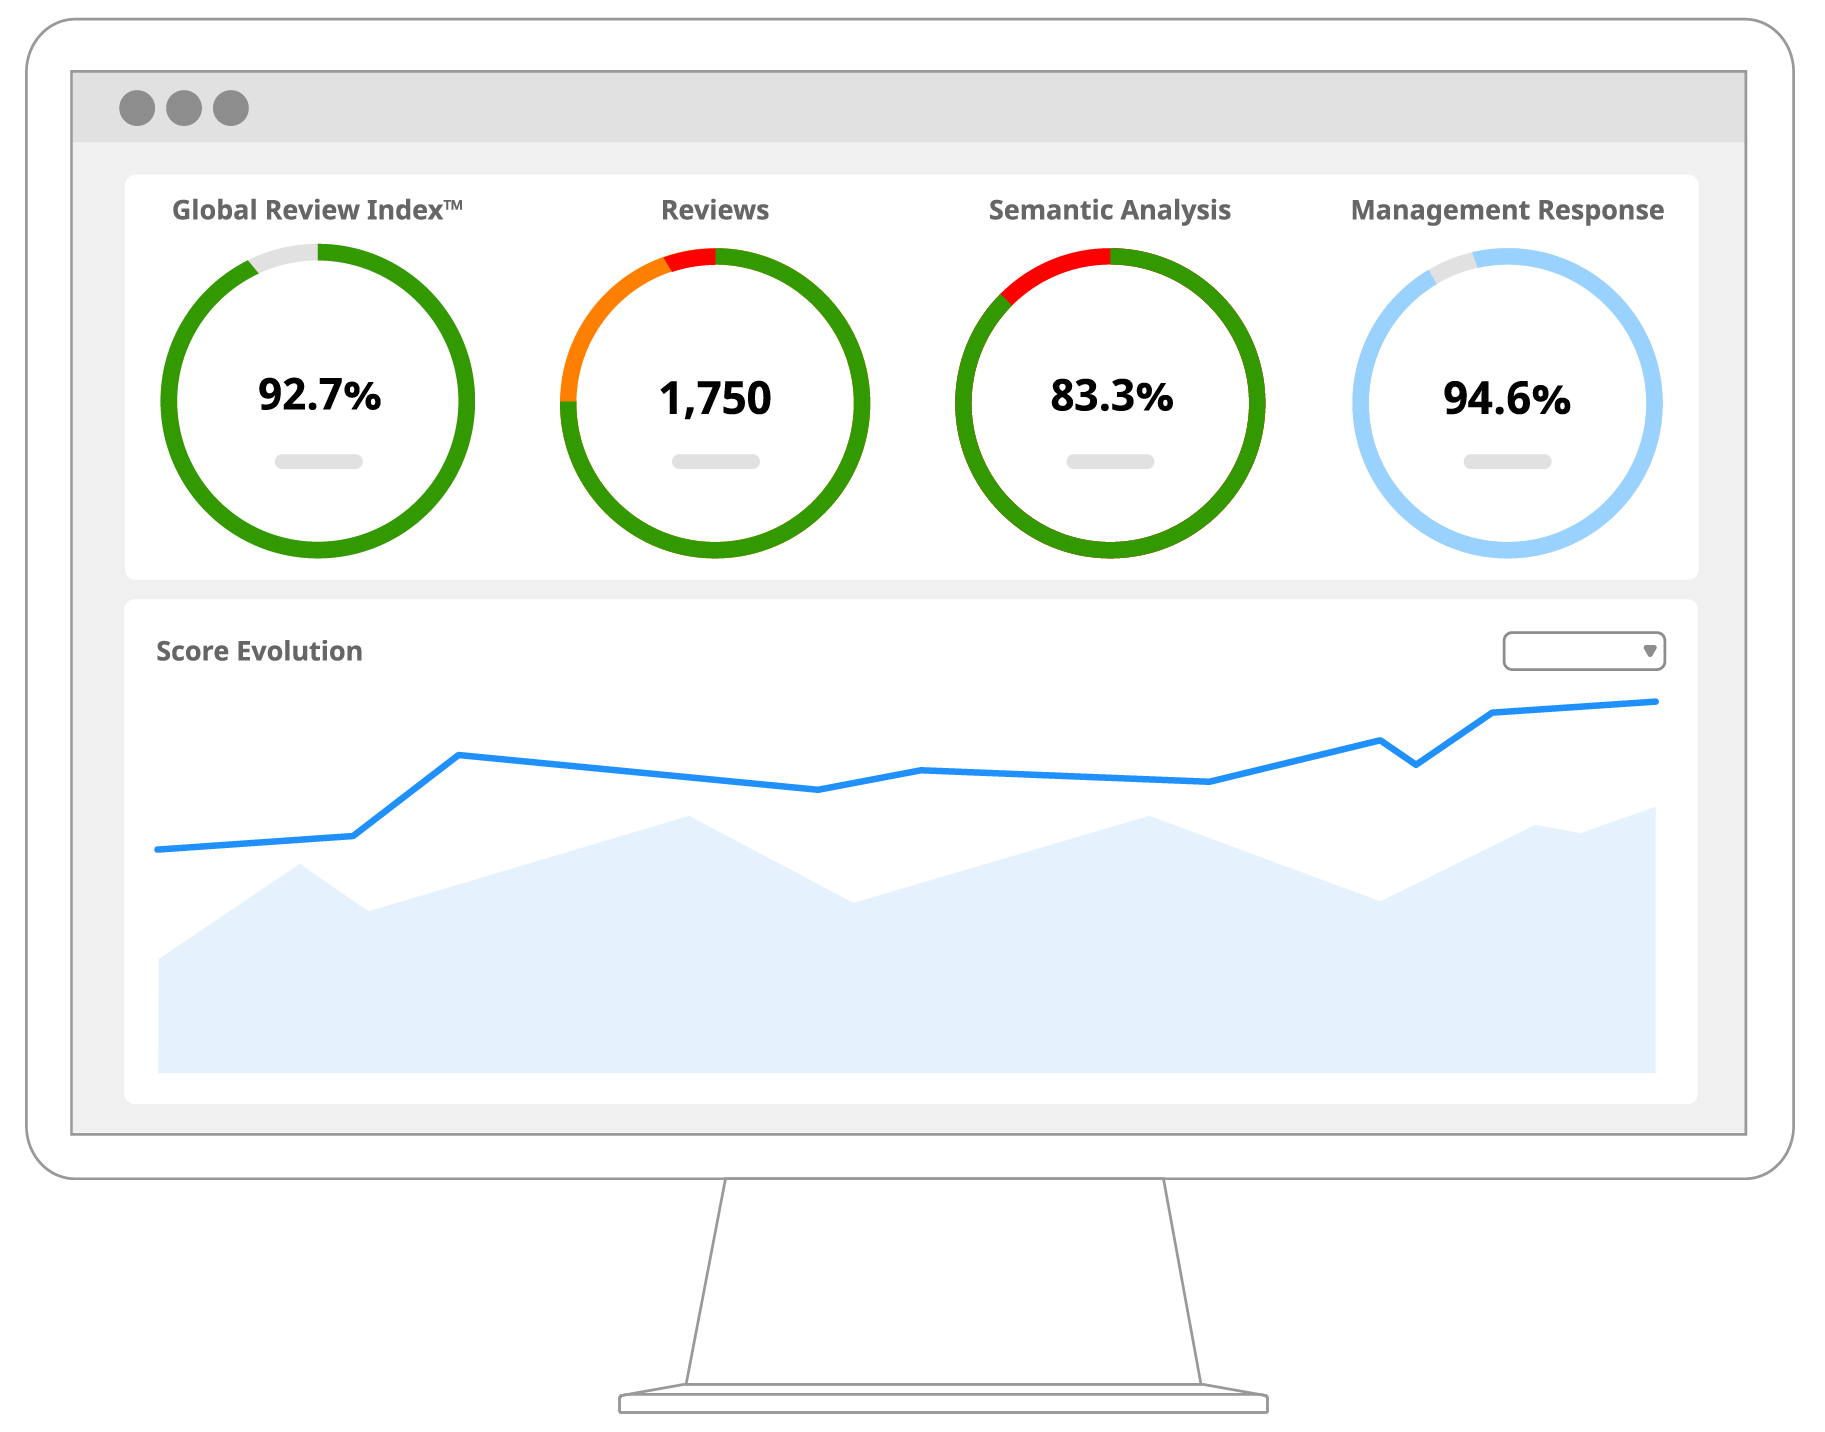 Dashboard with key metrics like Global Review Index, review volume, management response rate and the evolution of your online performance over time